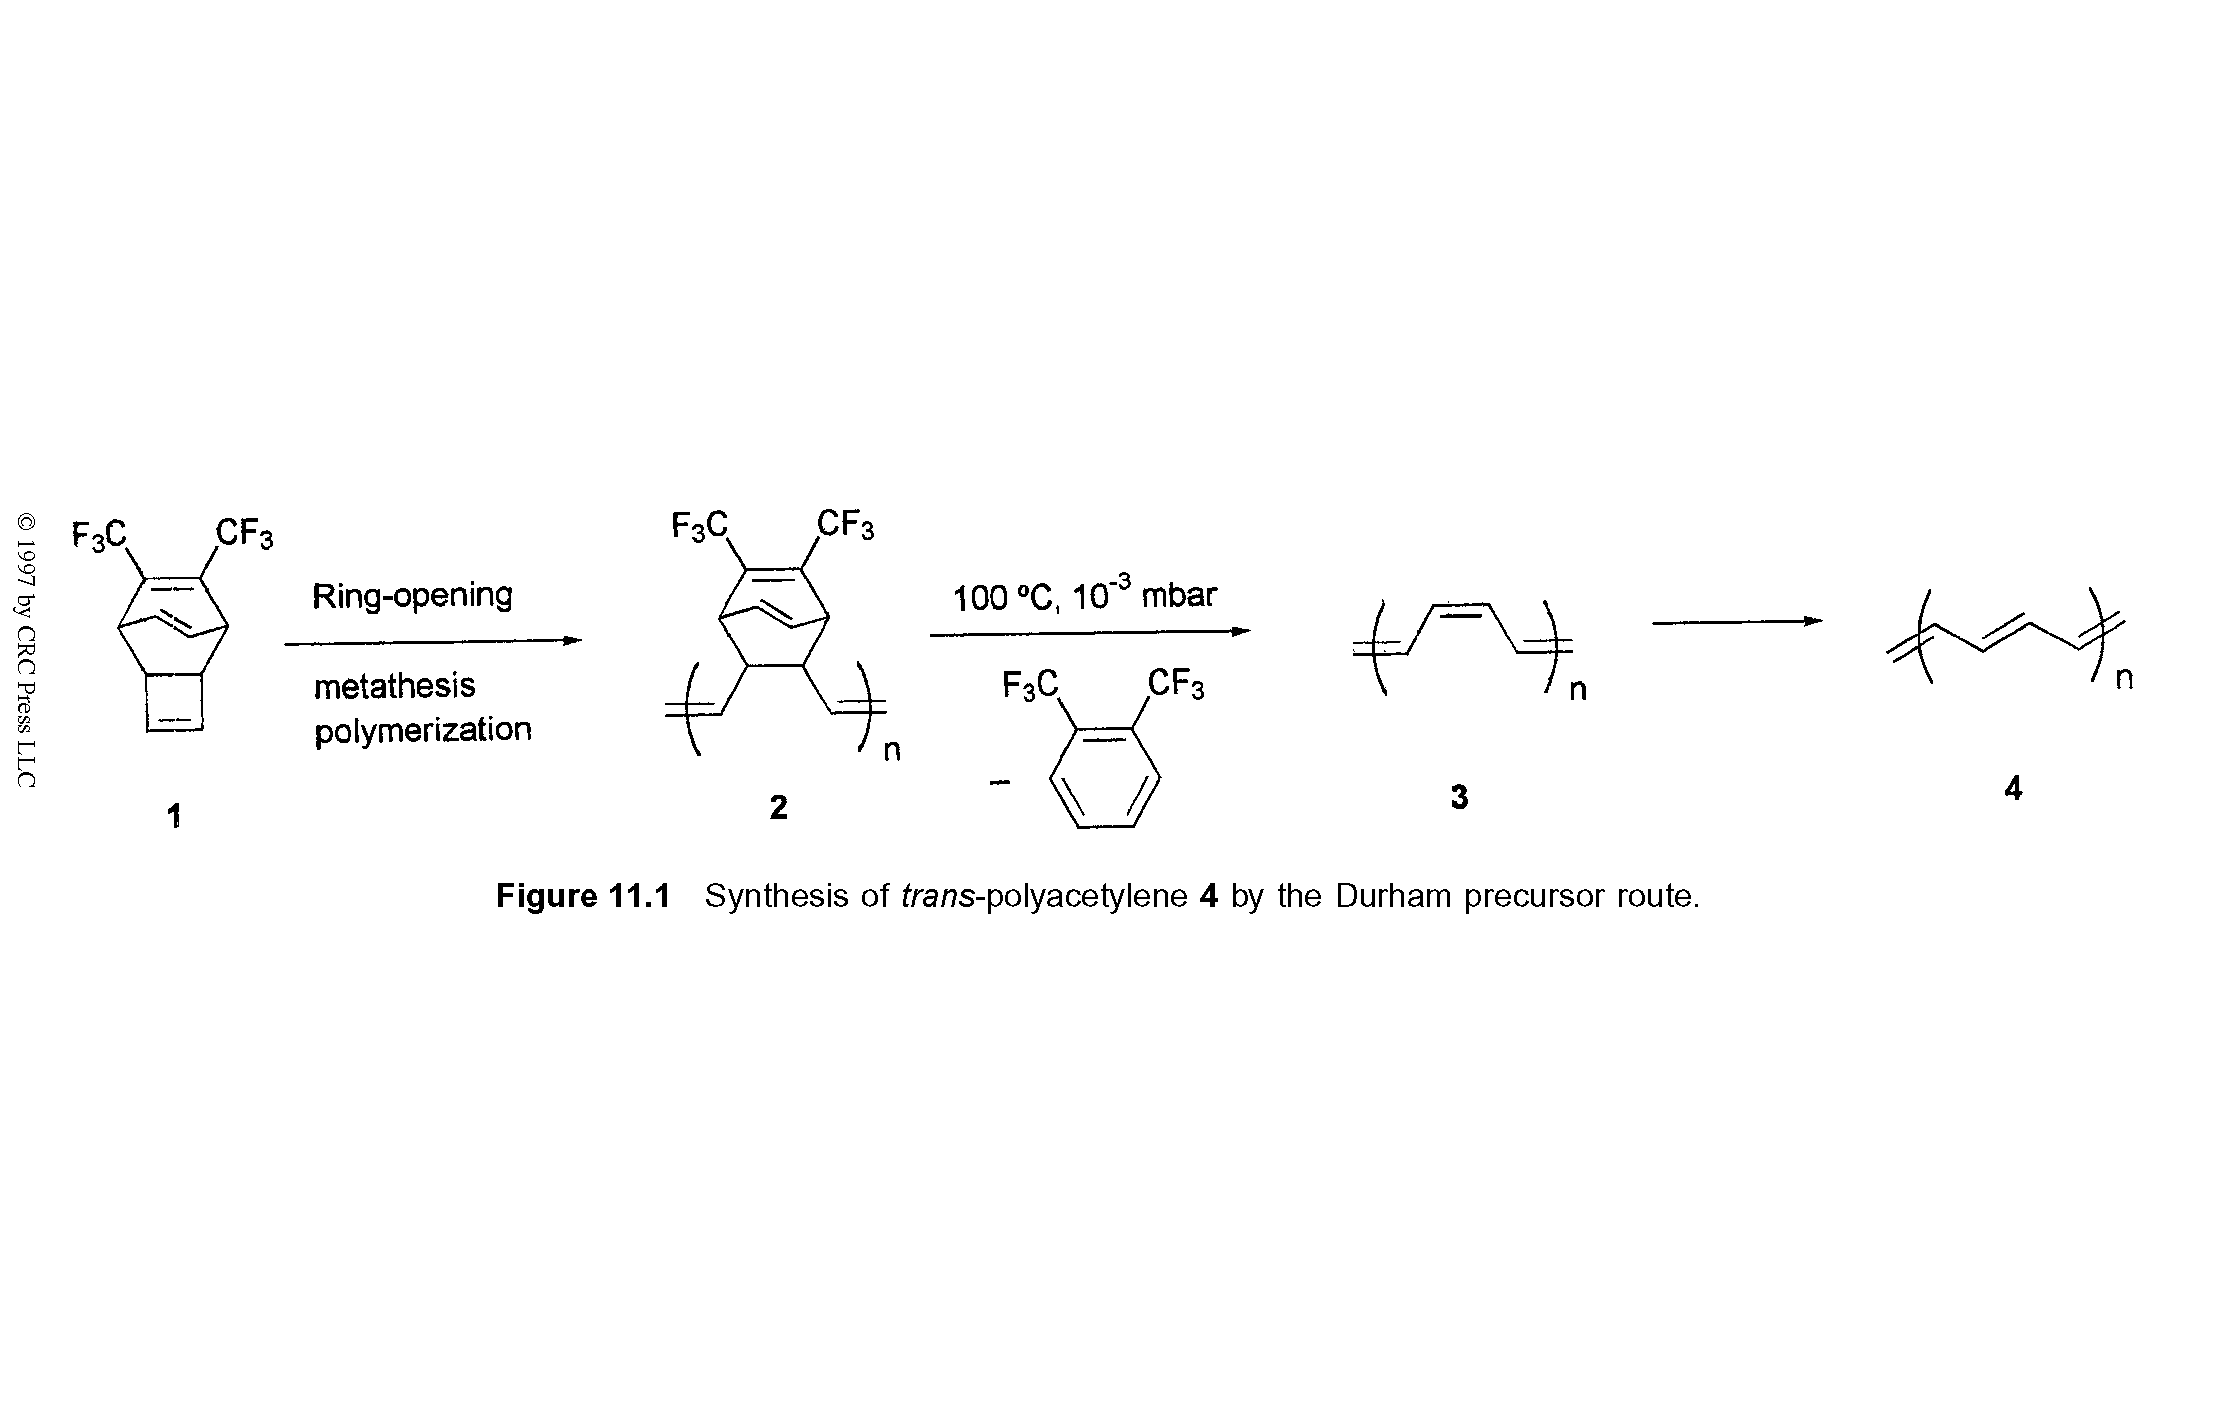 Figure 11.1 Synthesis of frans-polyacetylene 4 by the Durham precursor route.